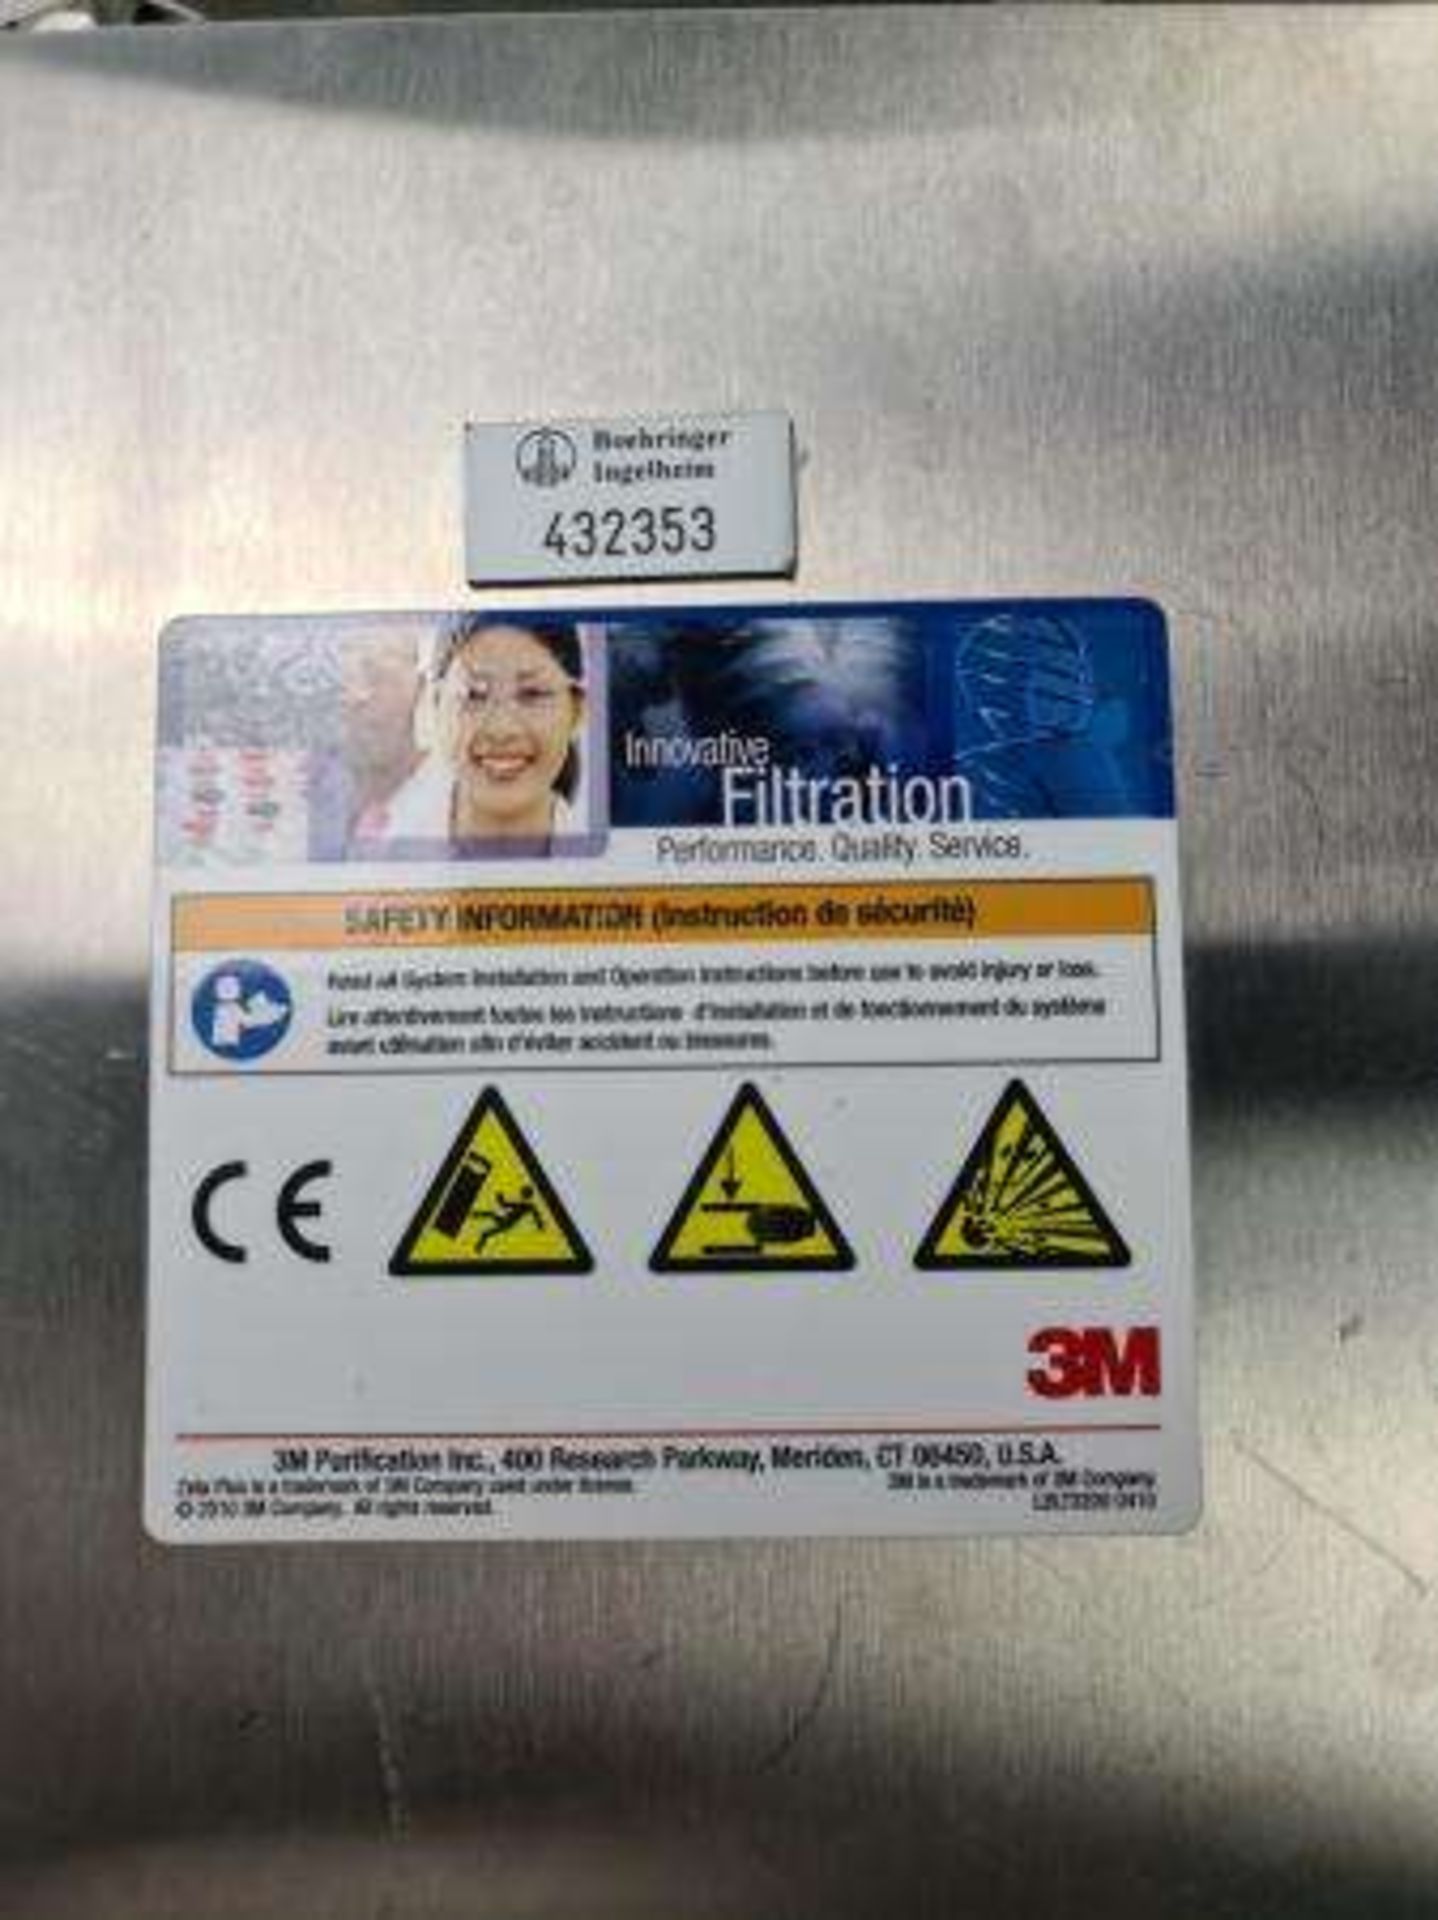 3M Zeta FILTRATION Plus Encapsulated EZP Plate-and-Frame 16EZB MPN 6123505 - Image 9 of 11